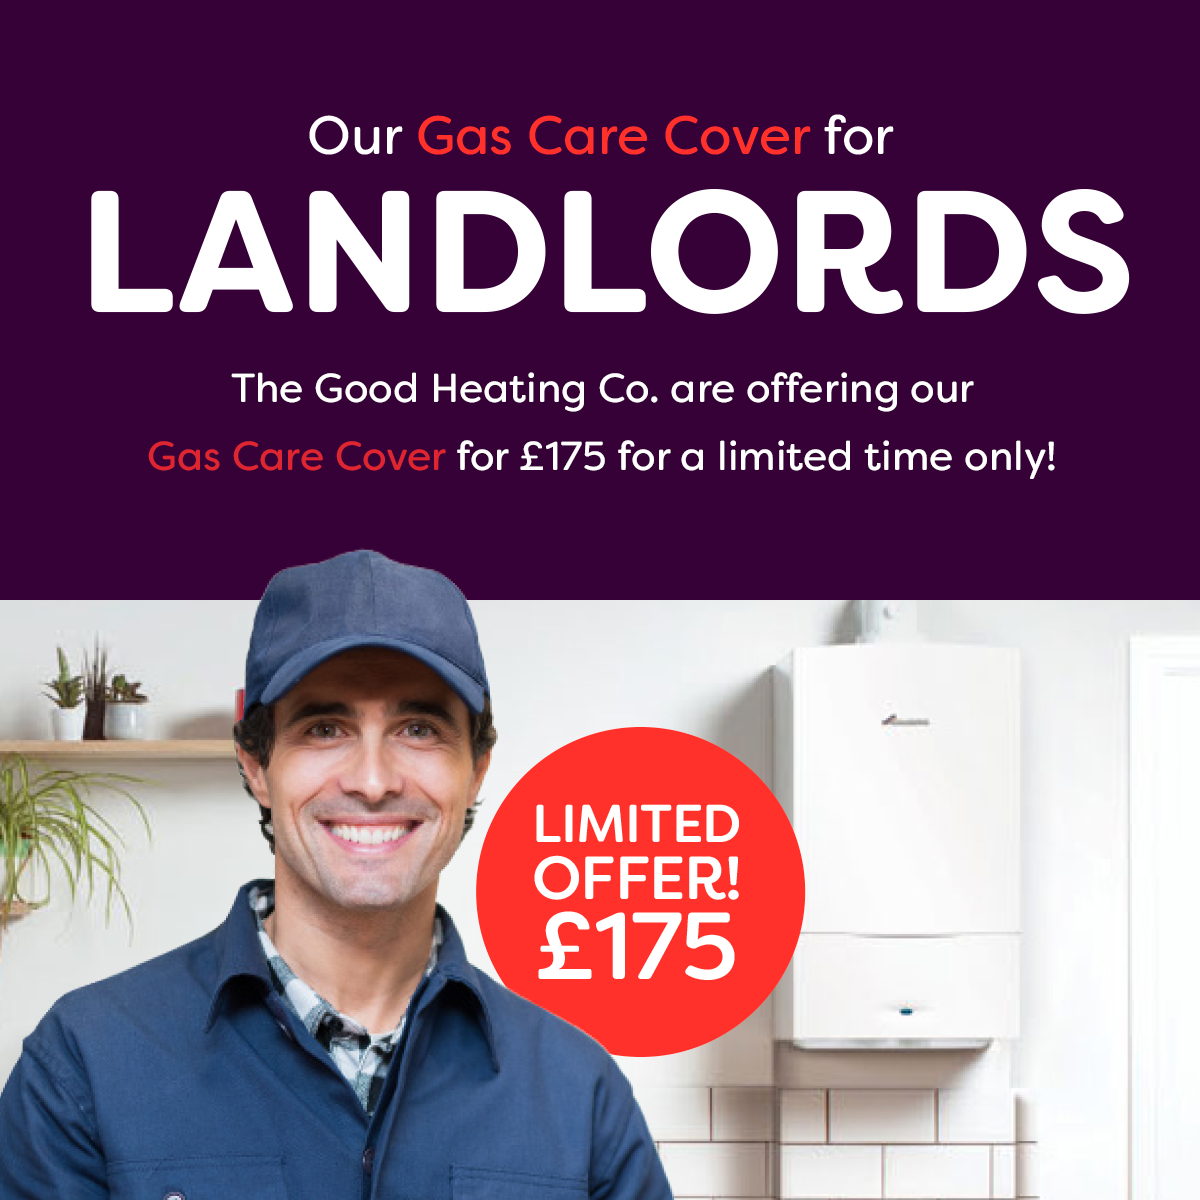 Learn about our Gas Care Cover offer for Landlords